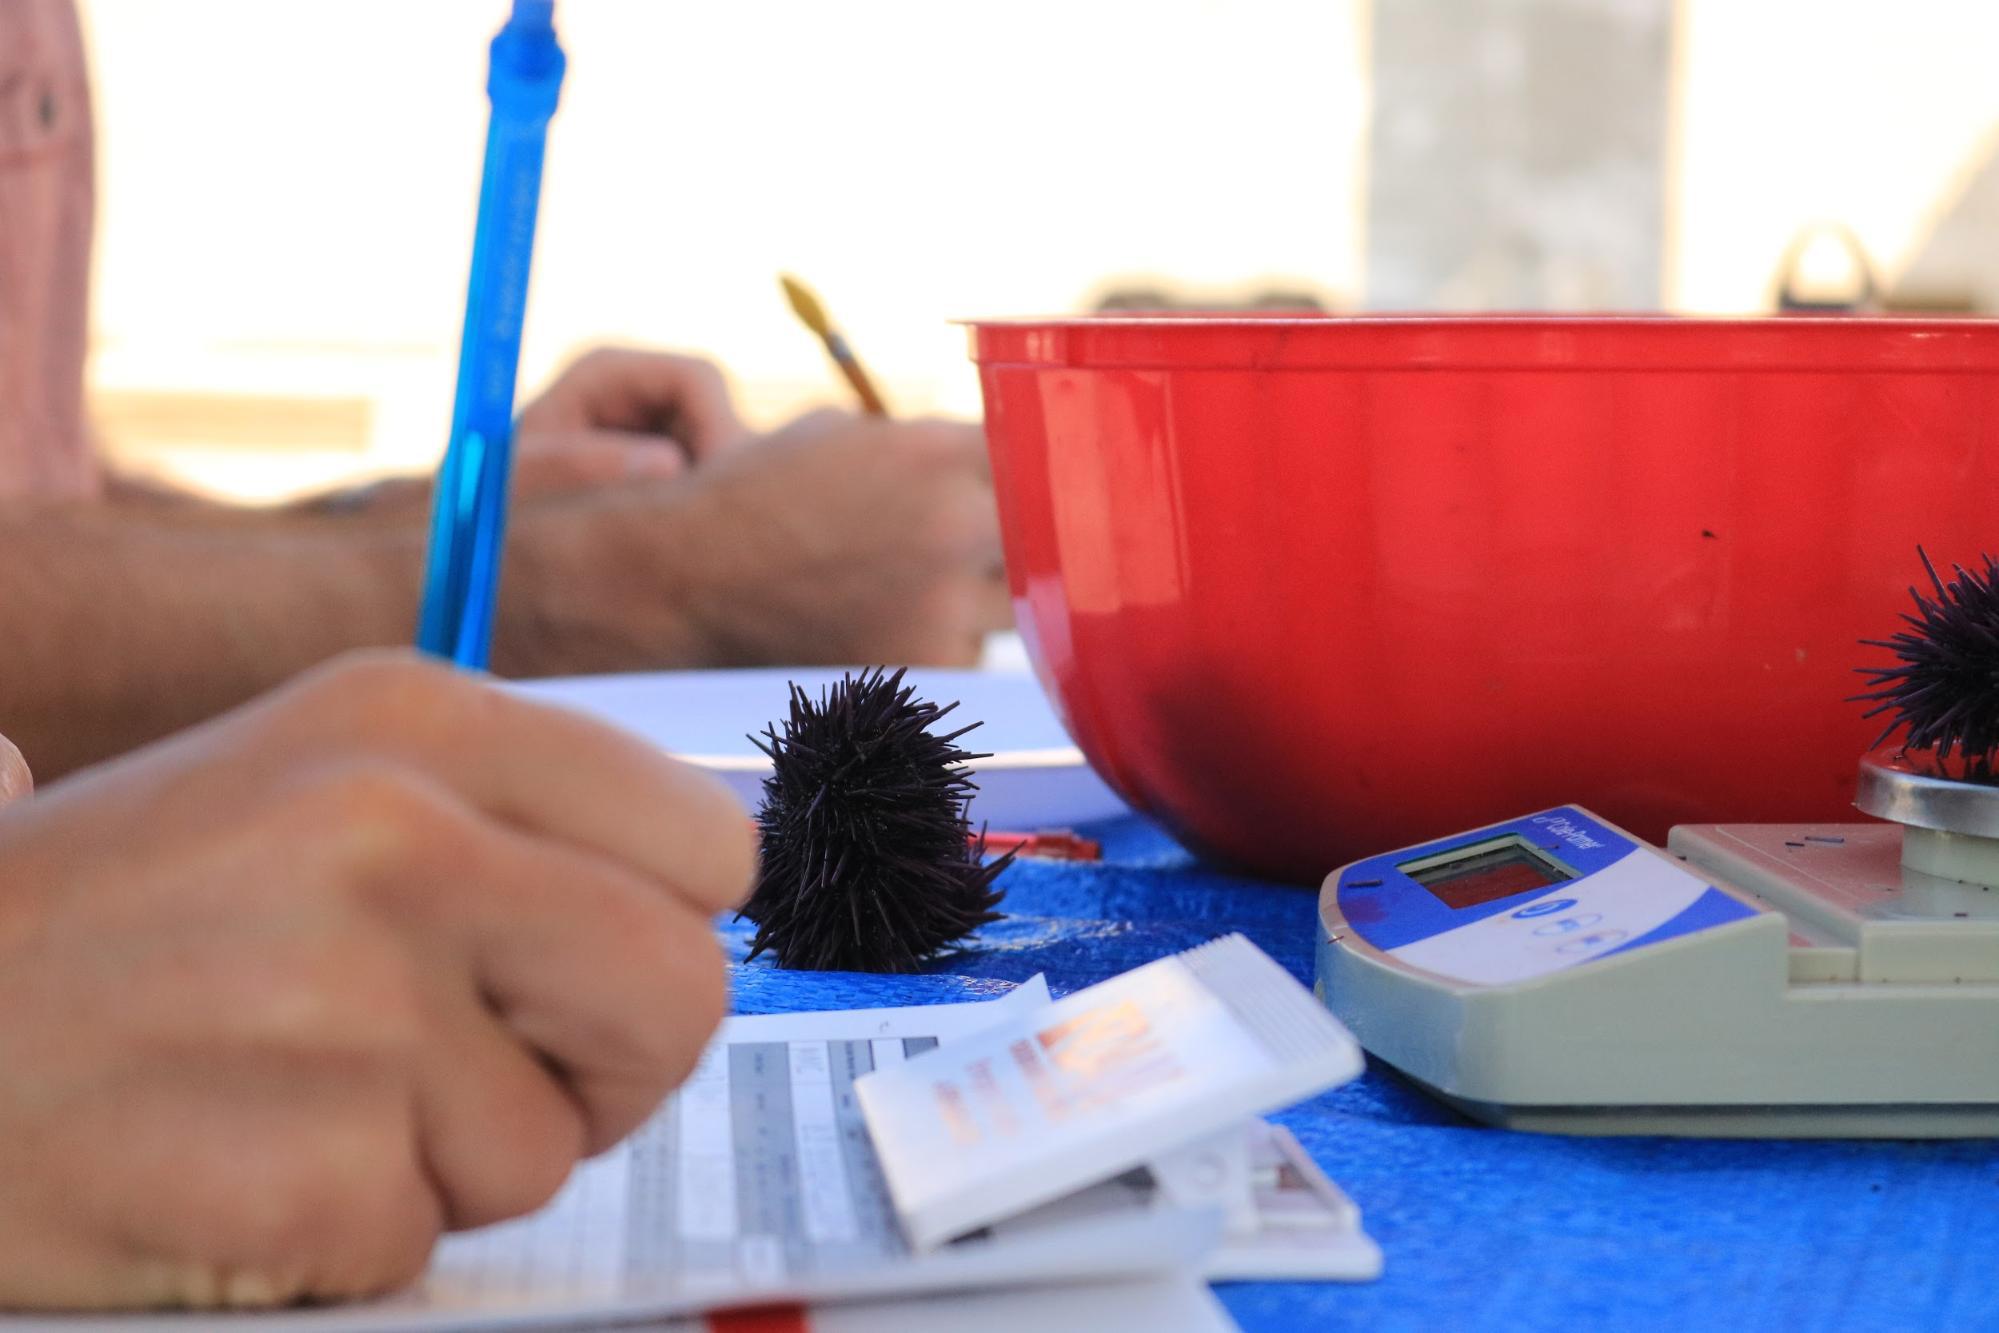 A close-up of hands holding a blue pen writing on a sheet of paper. On the same table is a blue cloth with a scale and a red plastic bowl. On the scale is a purple urchin. Another purple urchin in on the table next to the bowl.